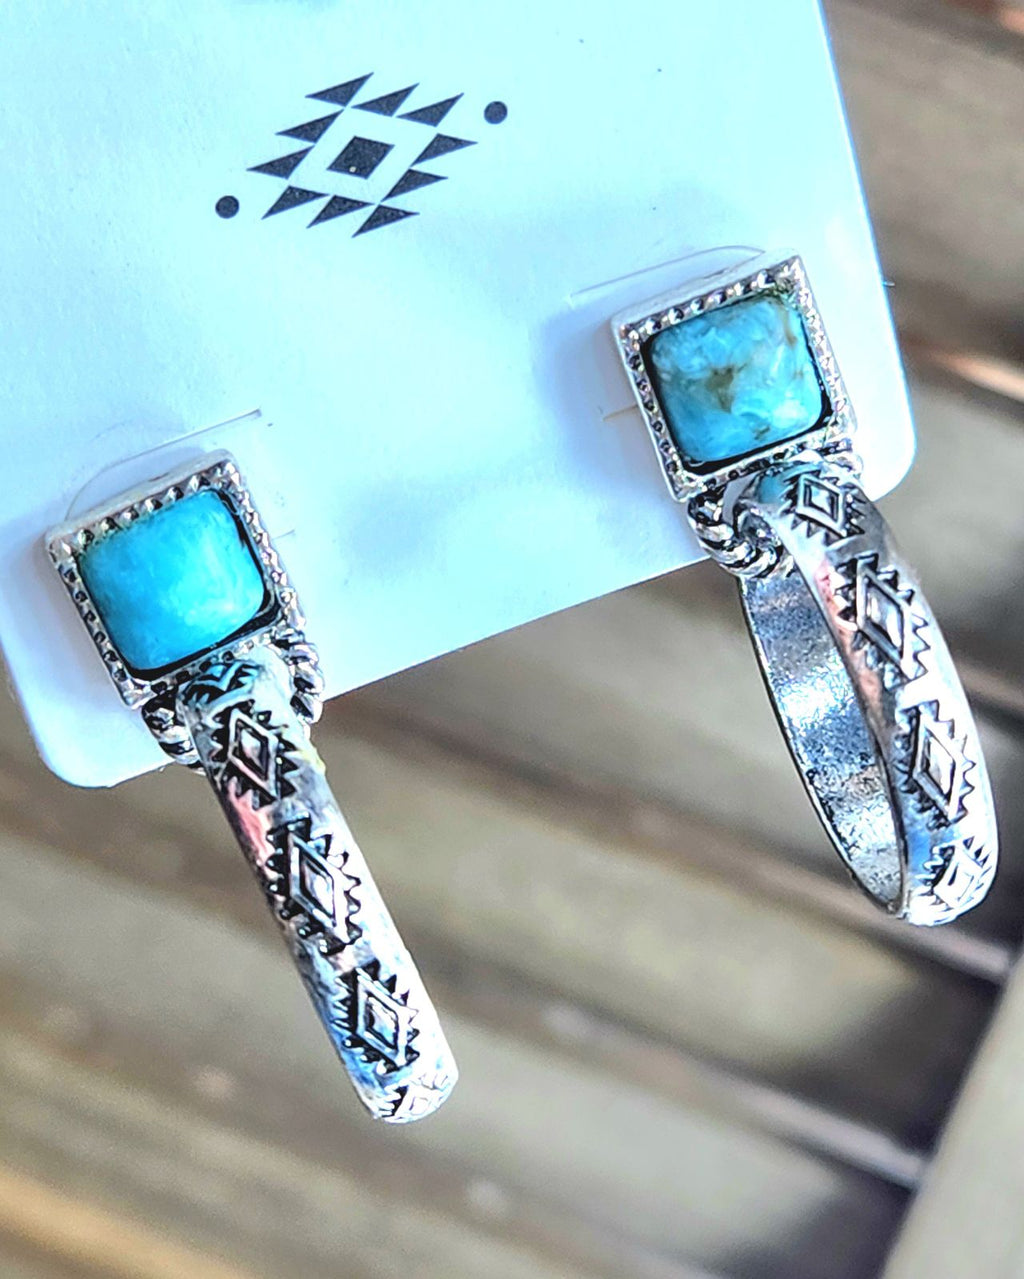 Square turquoise stone with Aztec hoops